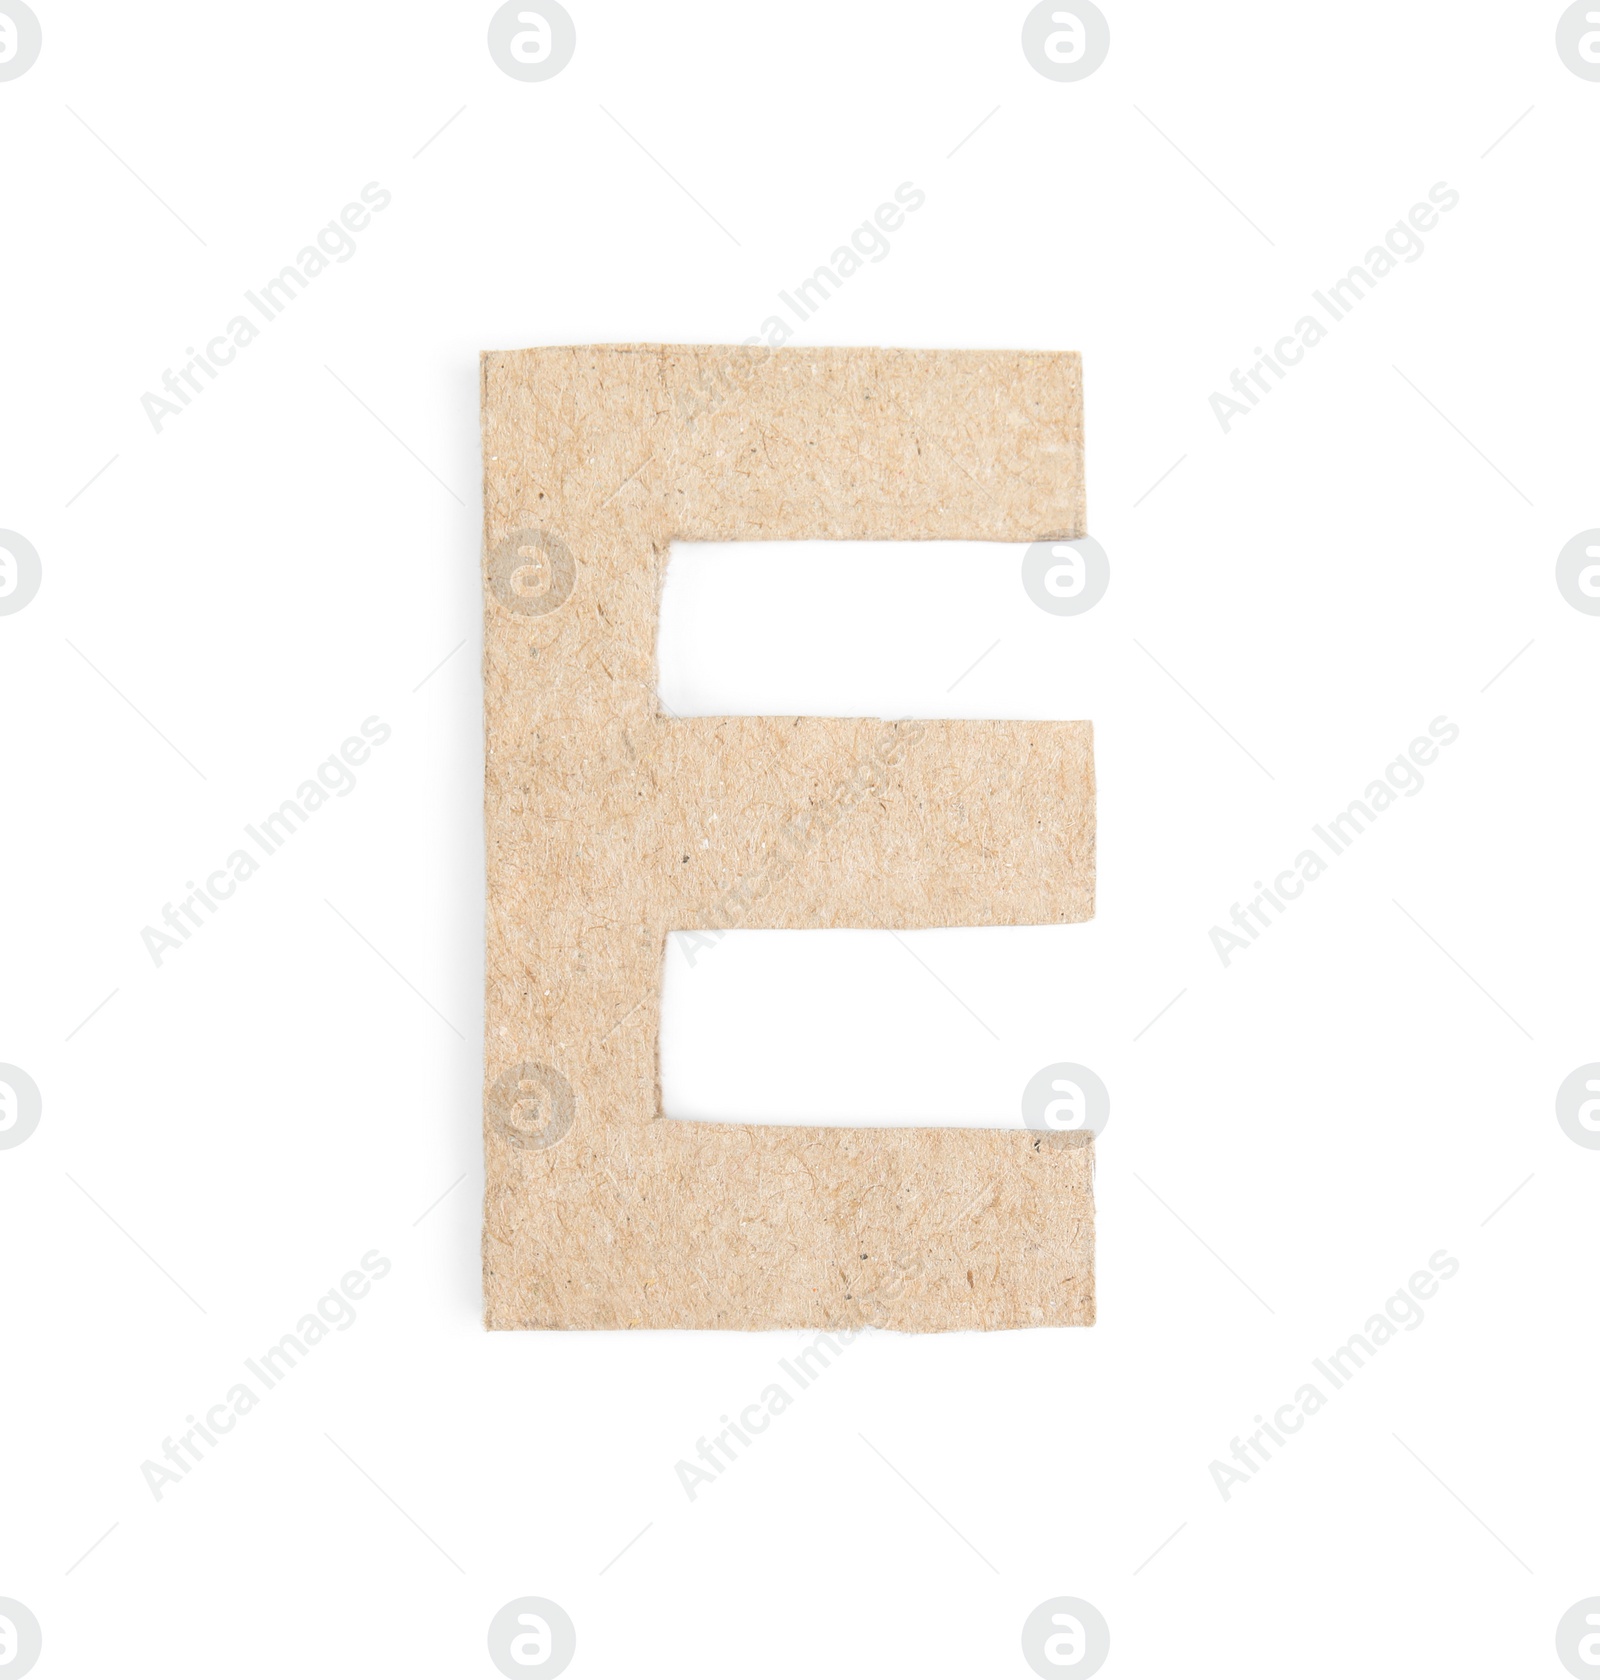 Photo of Letter E made of cardboard isolated on white